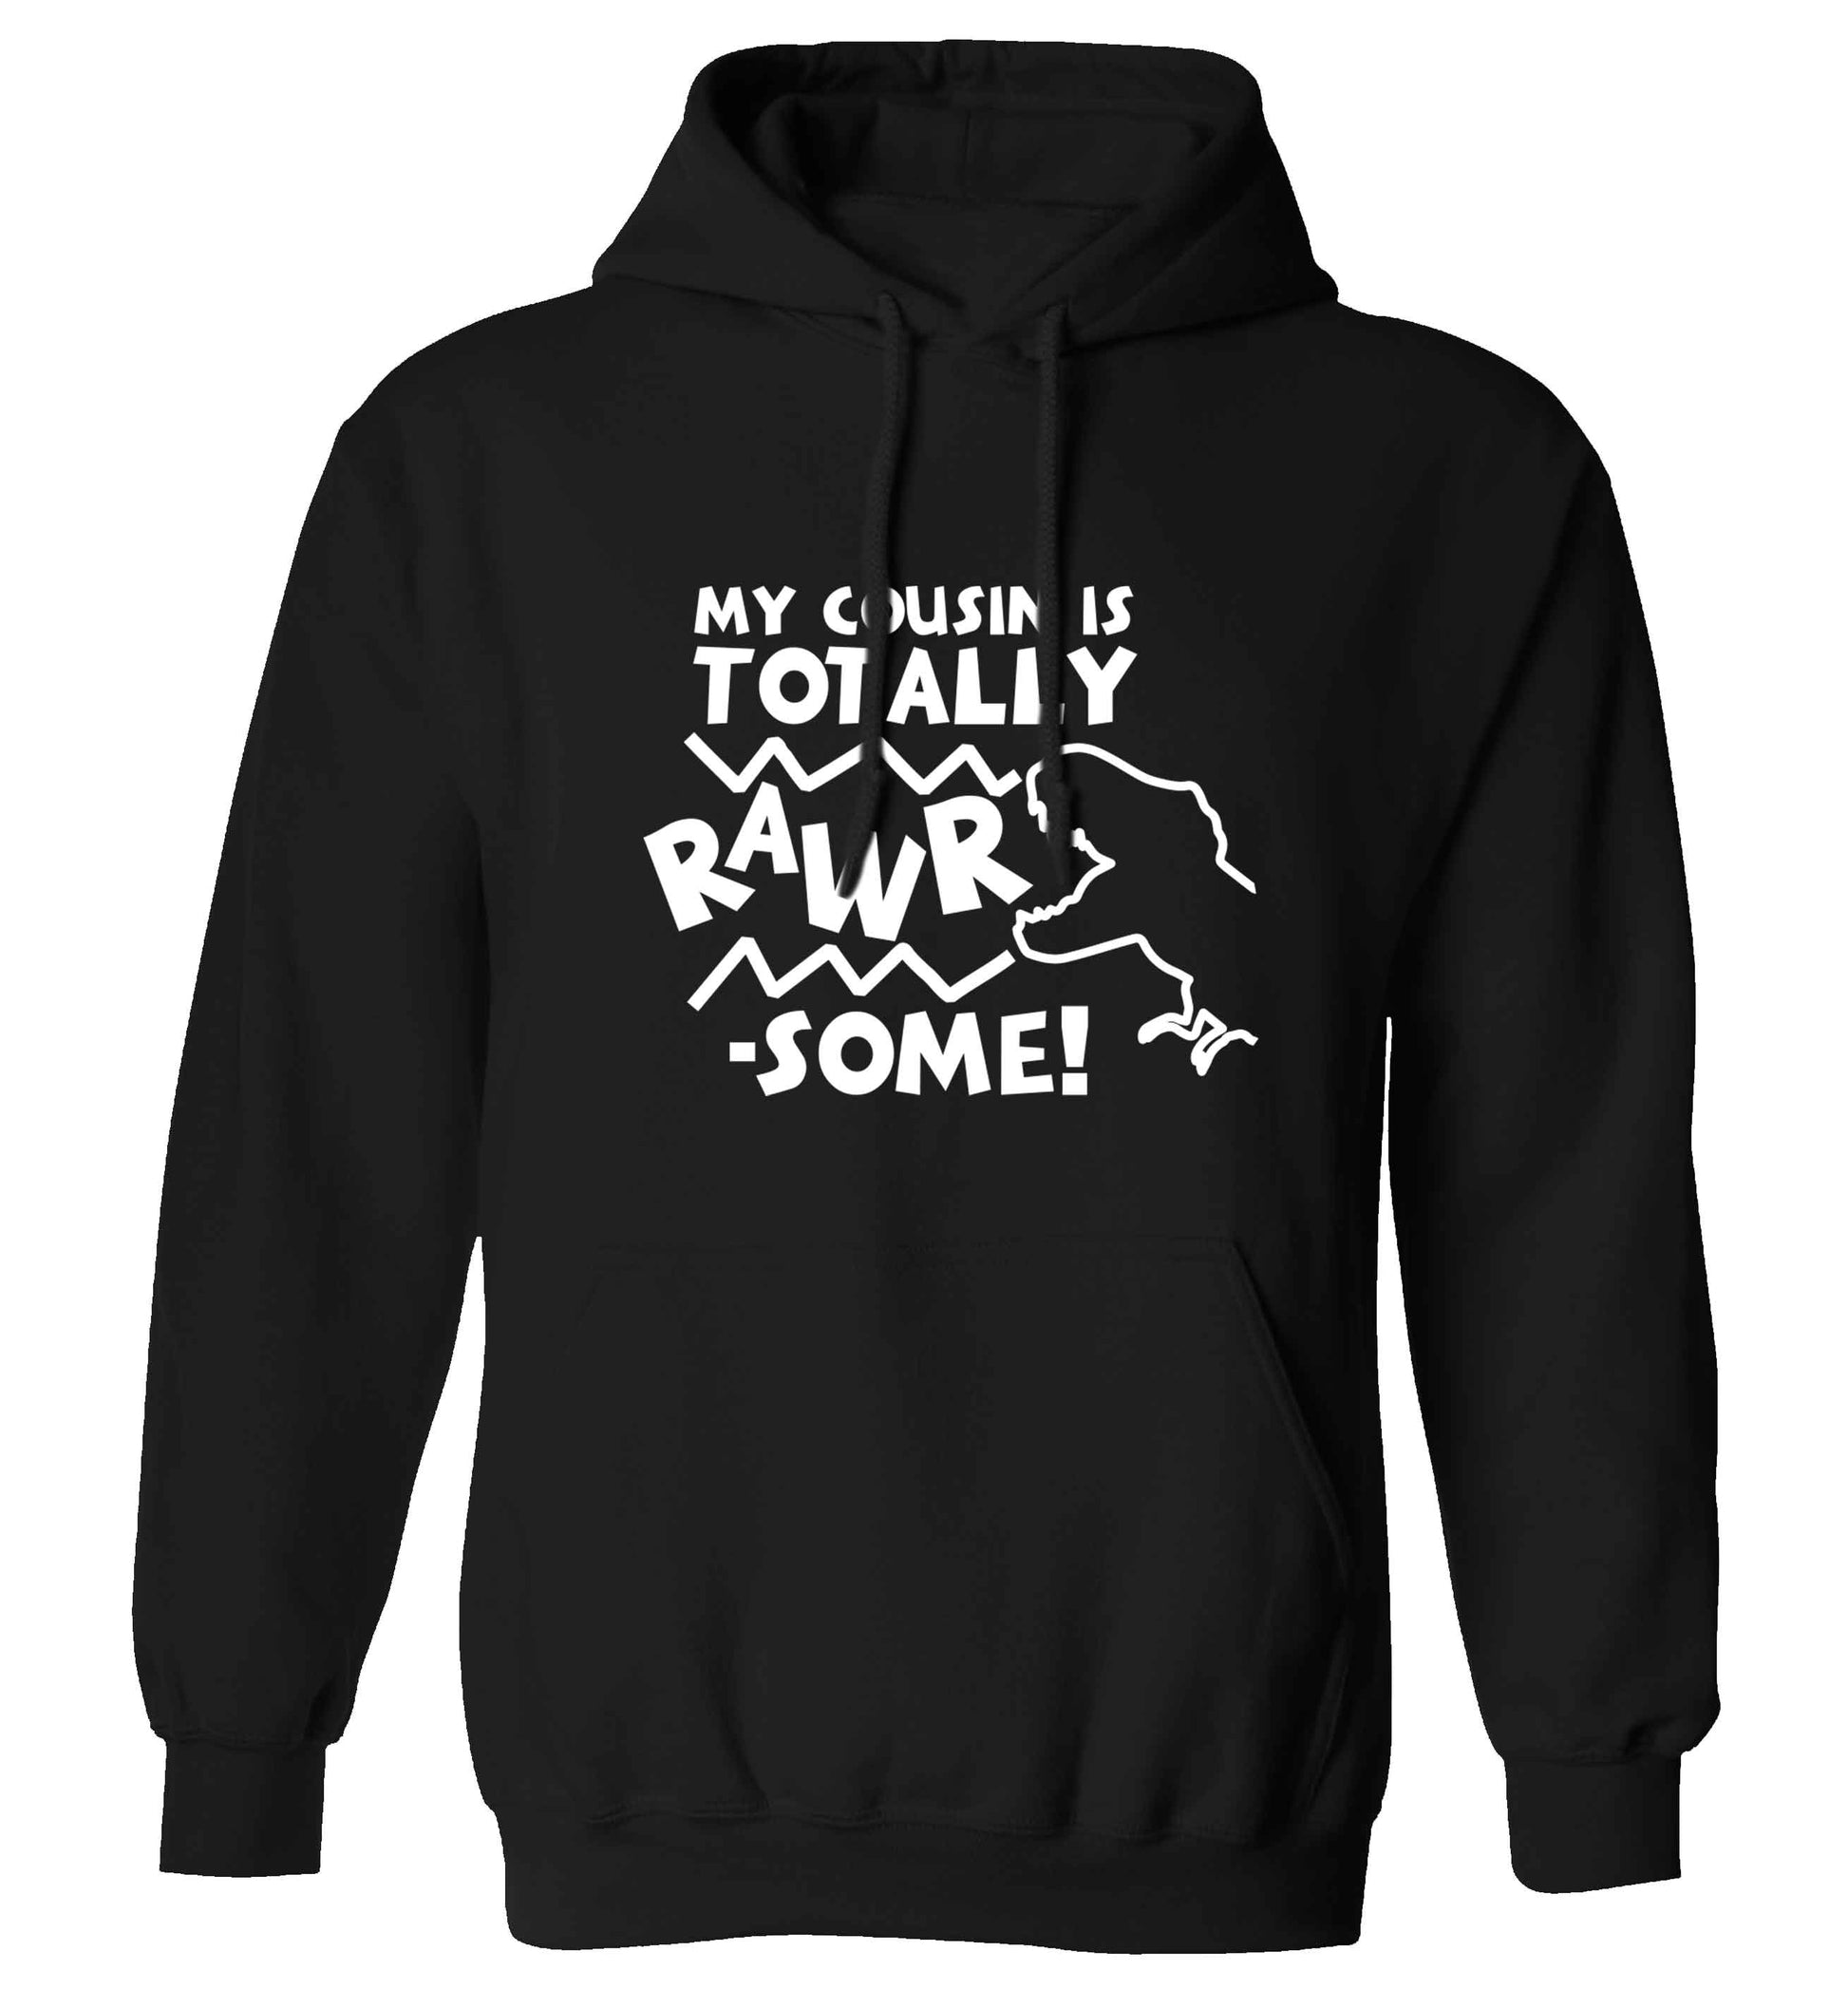 My cousin is totally rawrsome adults unisex black hoodie 2XL